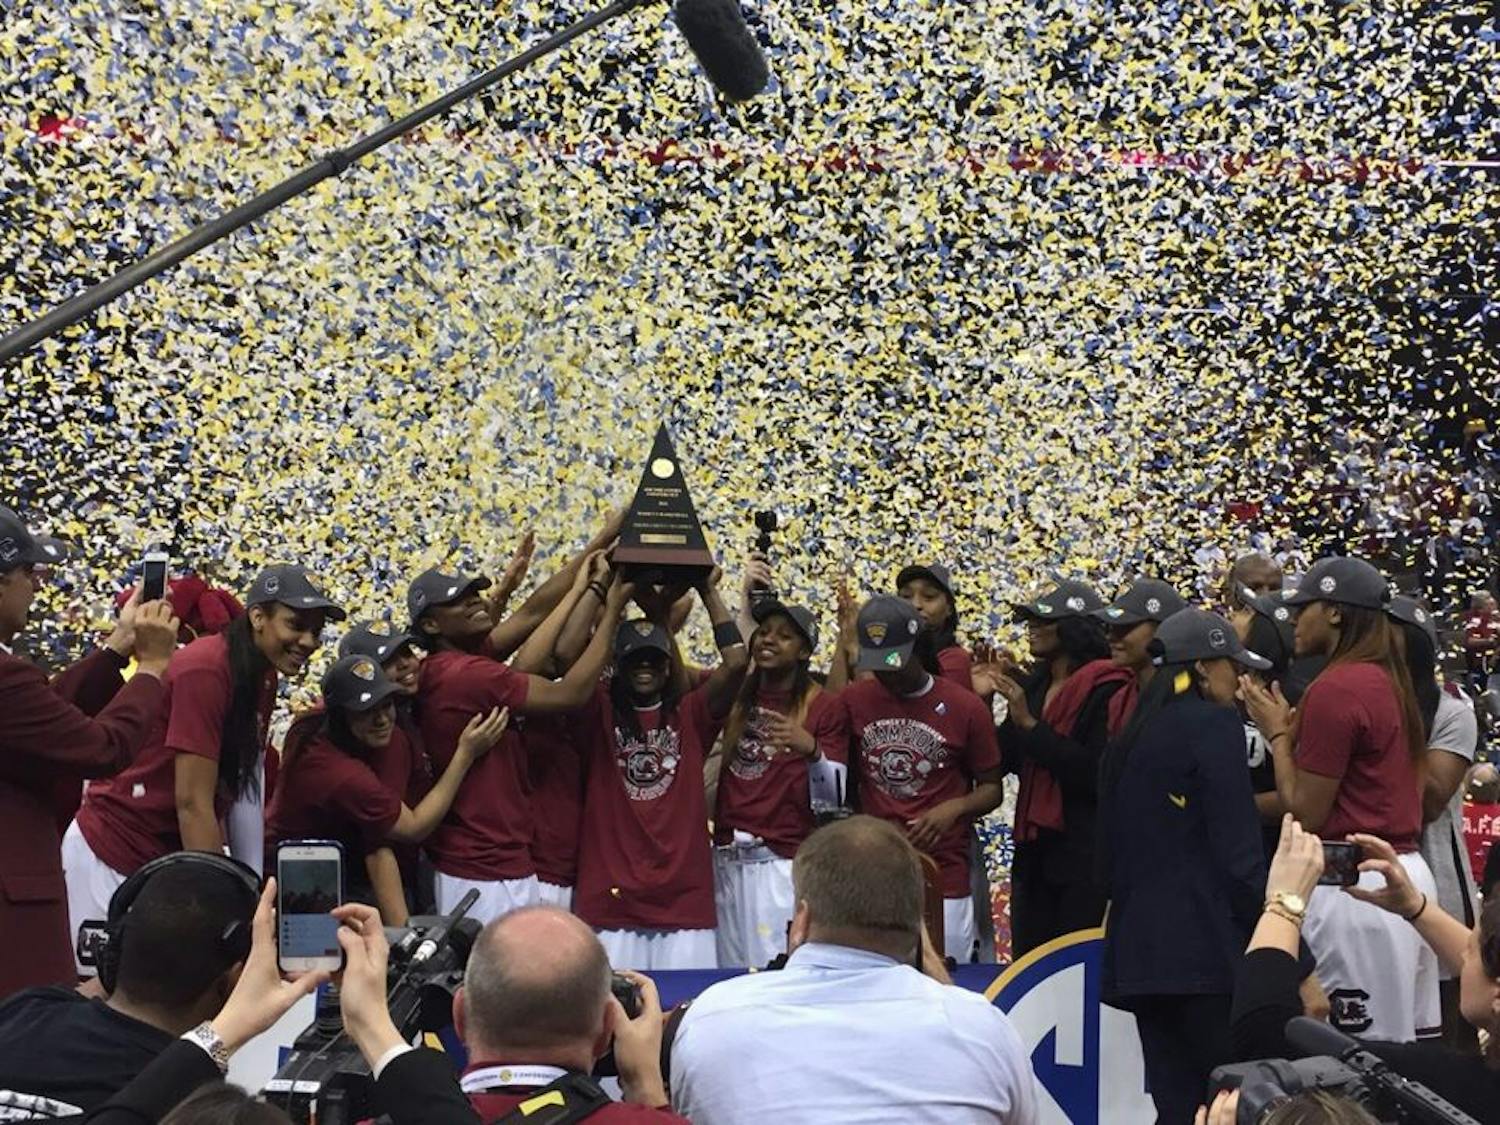 The South Carolina women's basketball team will ride a wave of confidence into the NCAA tournament after going undefeated in SEC play, clinching the title for the second year in a row.